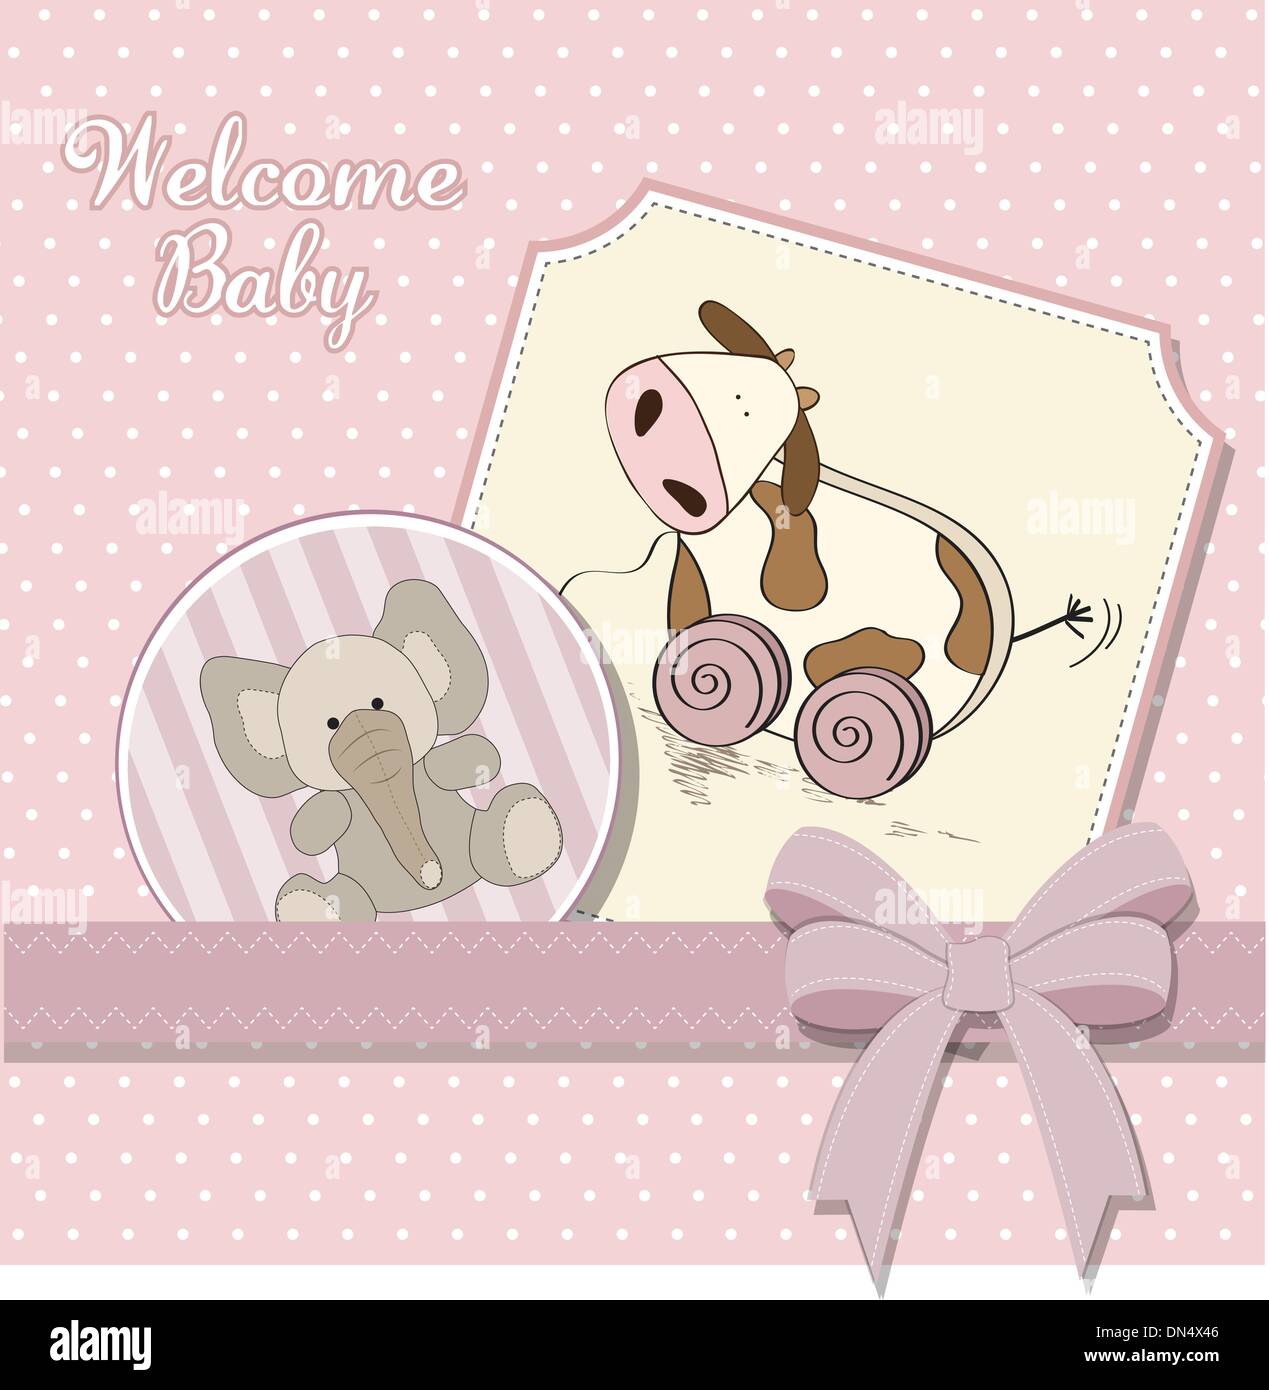 Baby shower card with cute cow toy Stock Vector